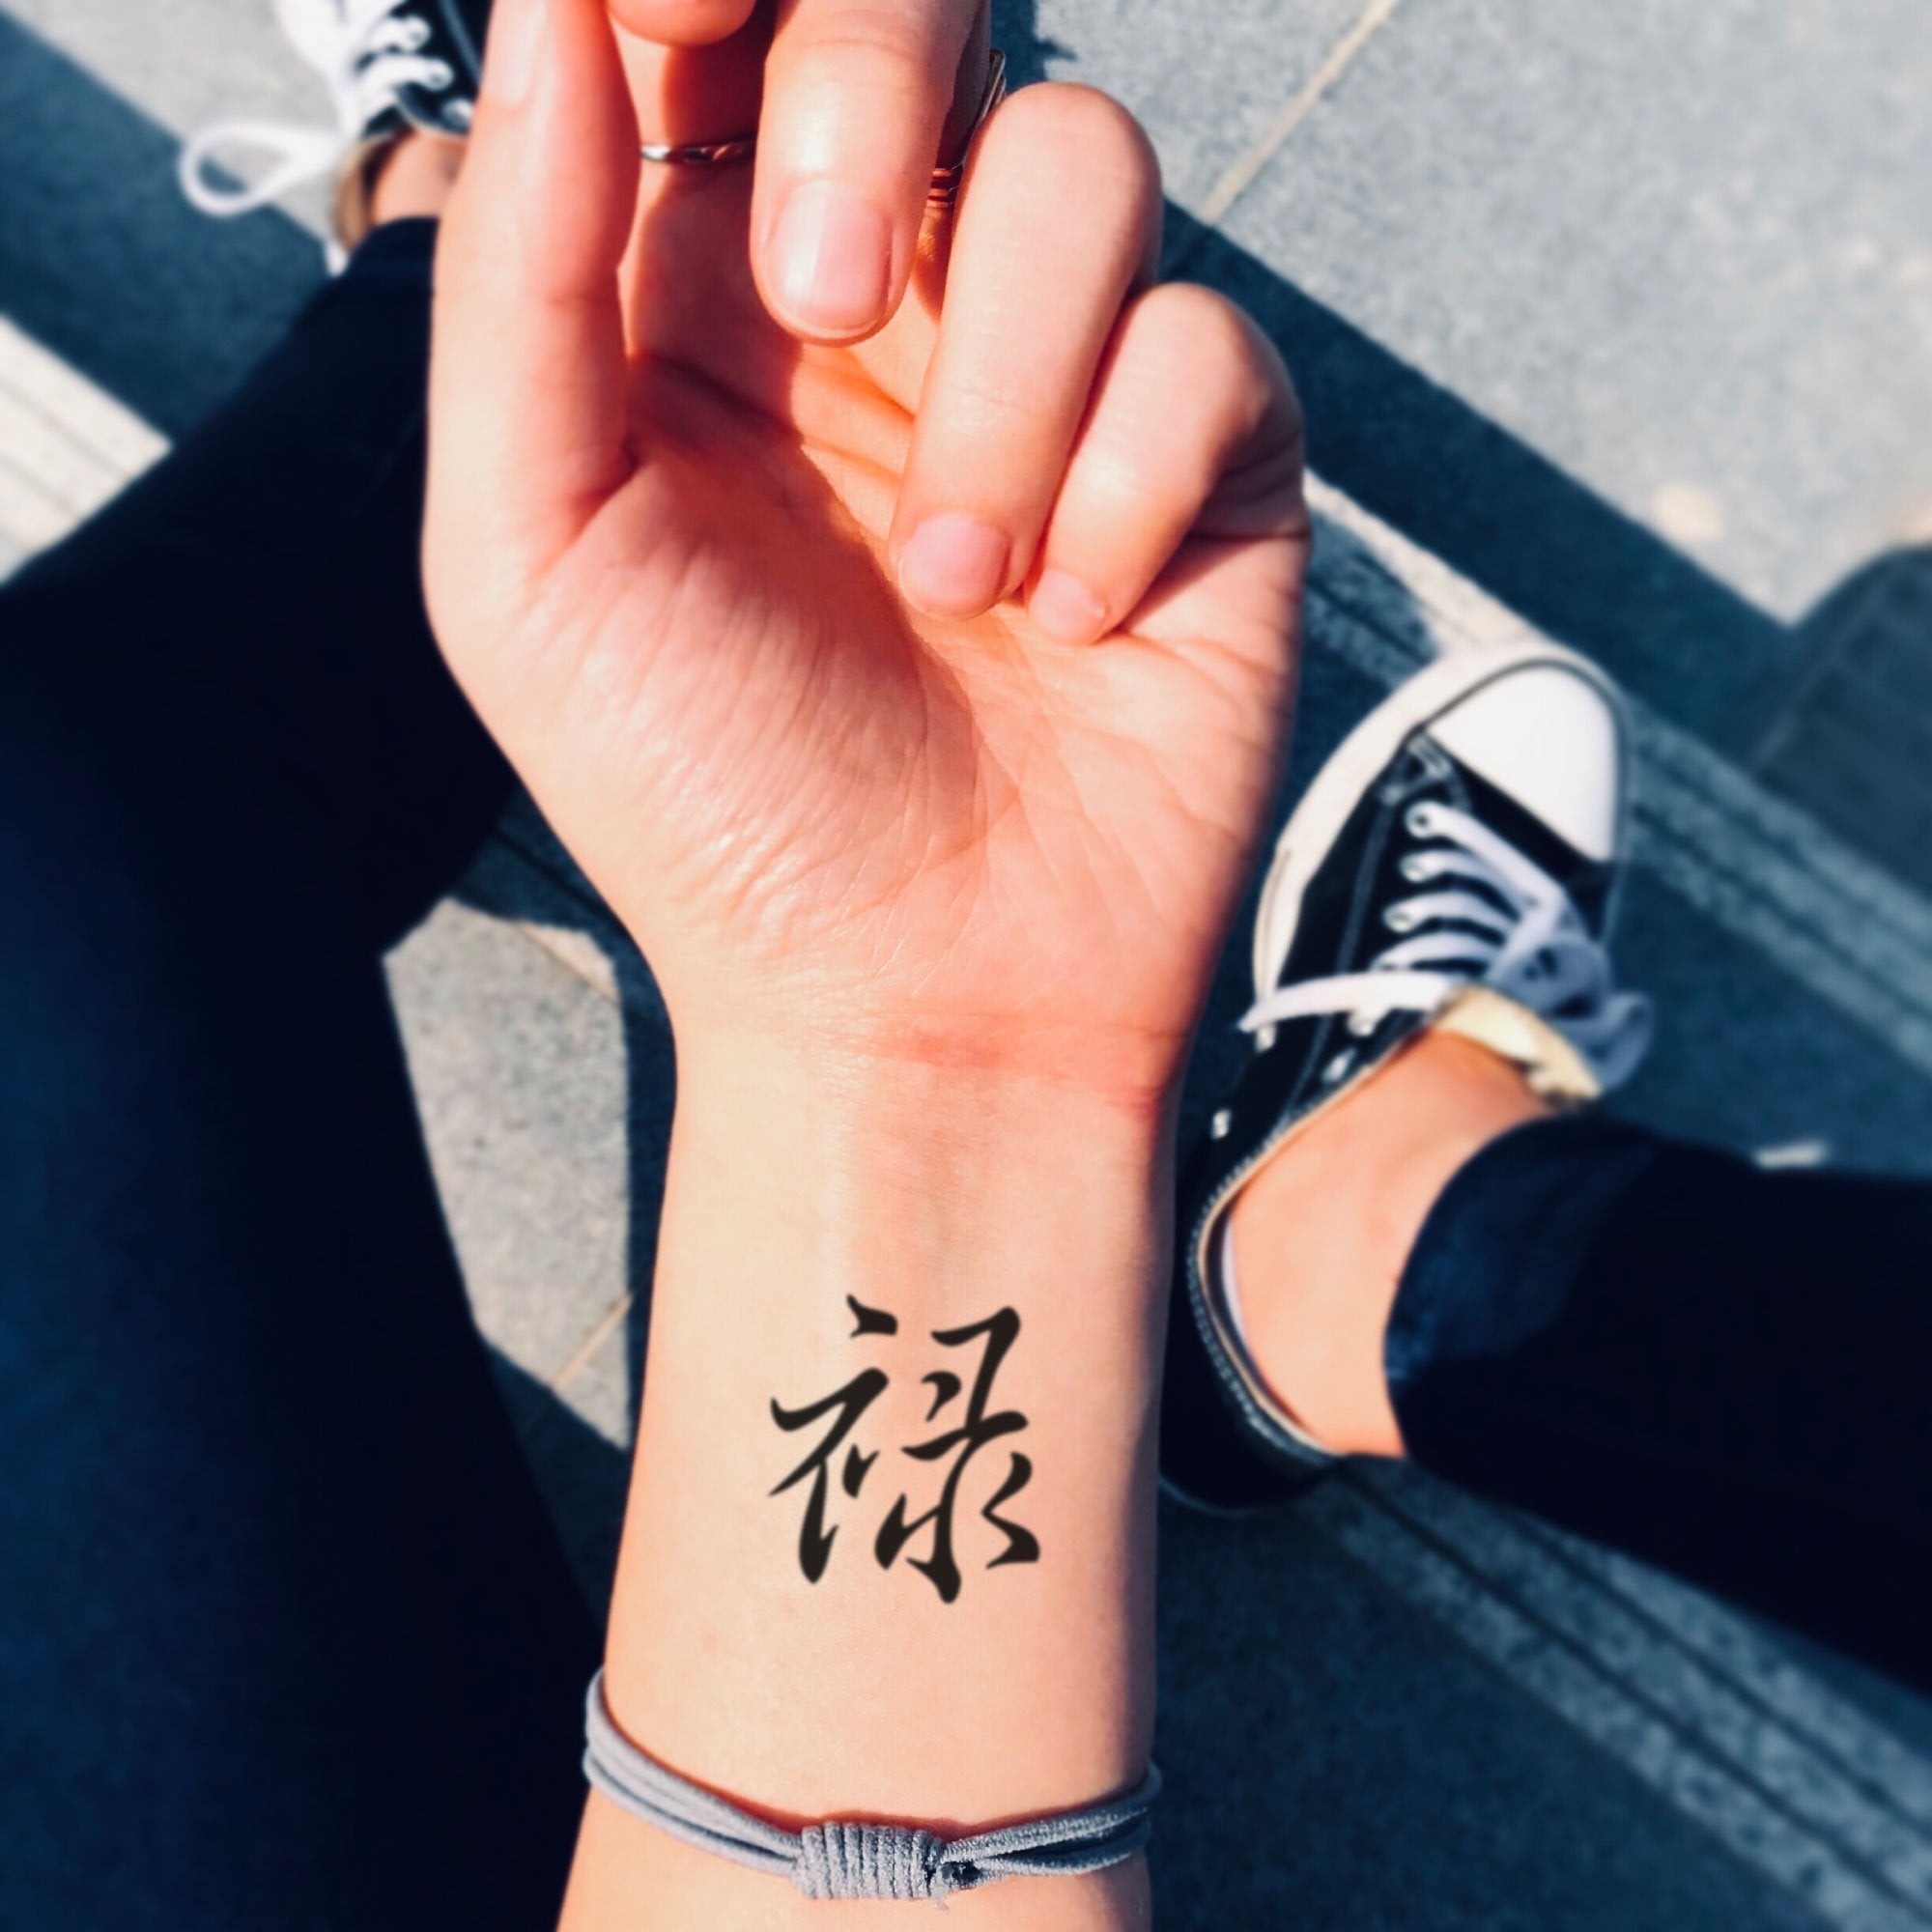 Chinese tattoo word | Chinese tattoo, Phrase tattoos, Chinese letter tattoos